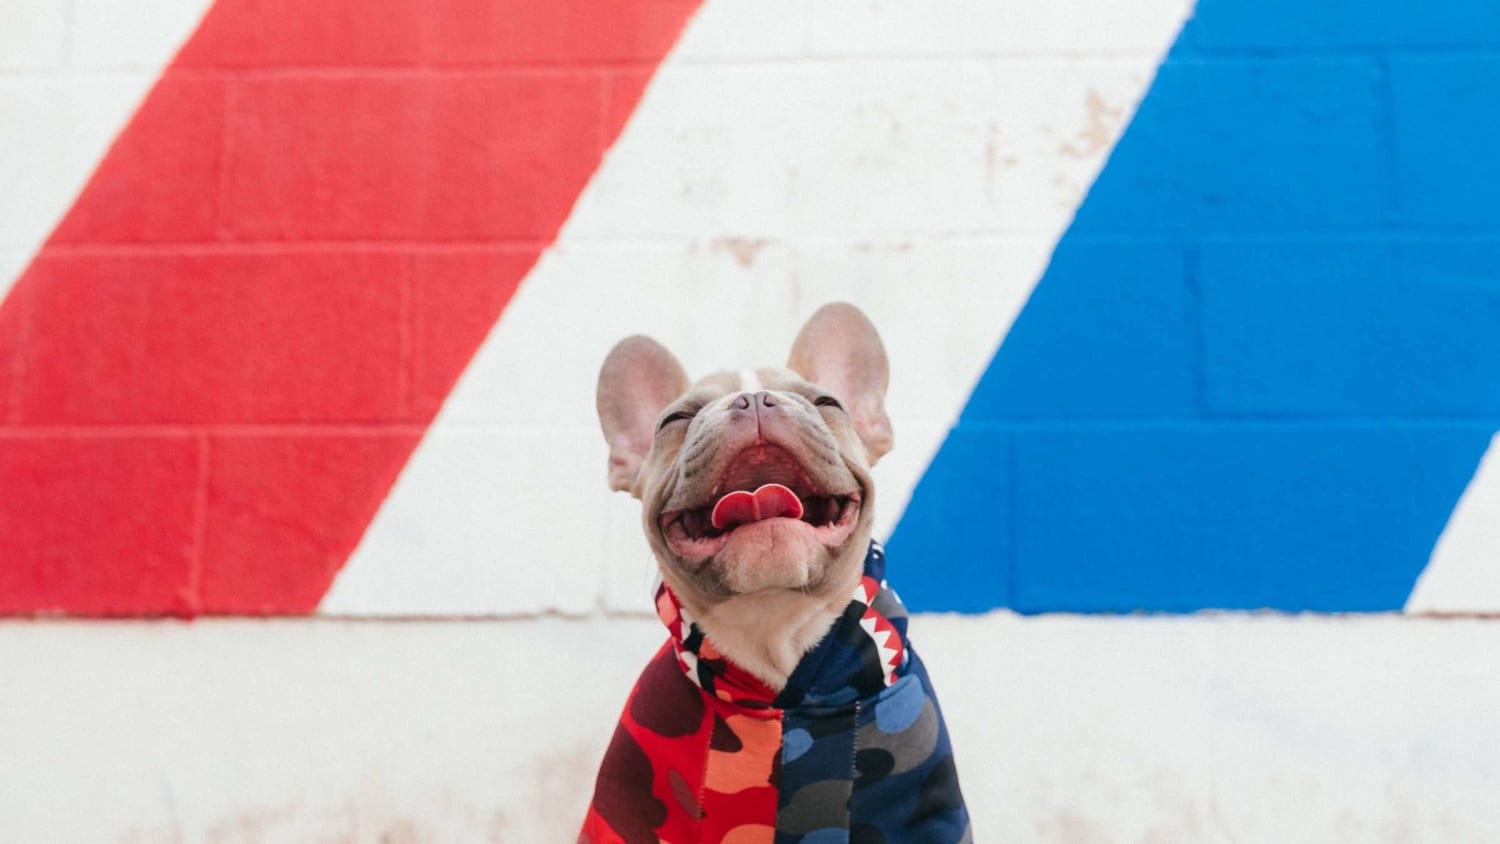 A French Bulldog Was Just Elected Mayor of Rabbit Hash, Kentucky in a Landslide Victory